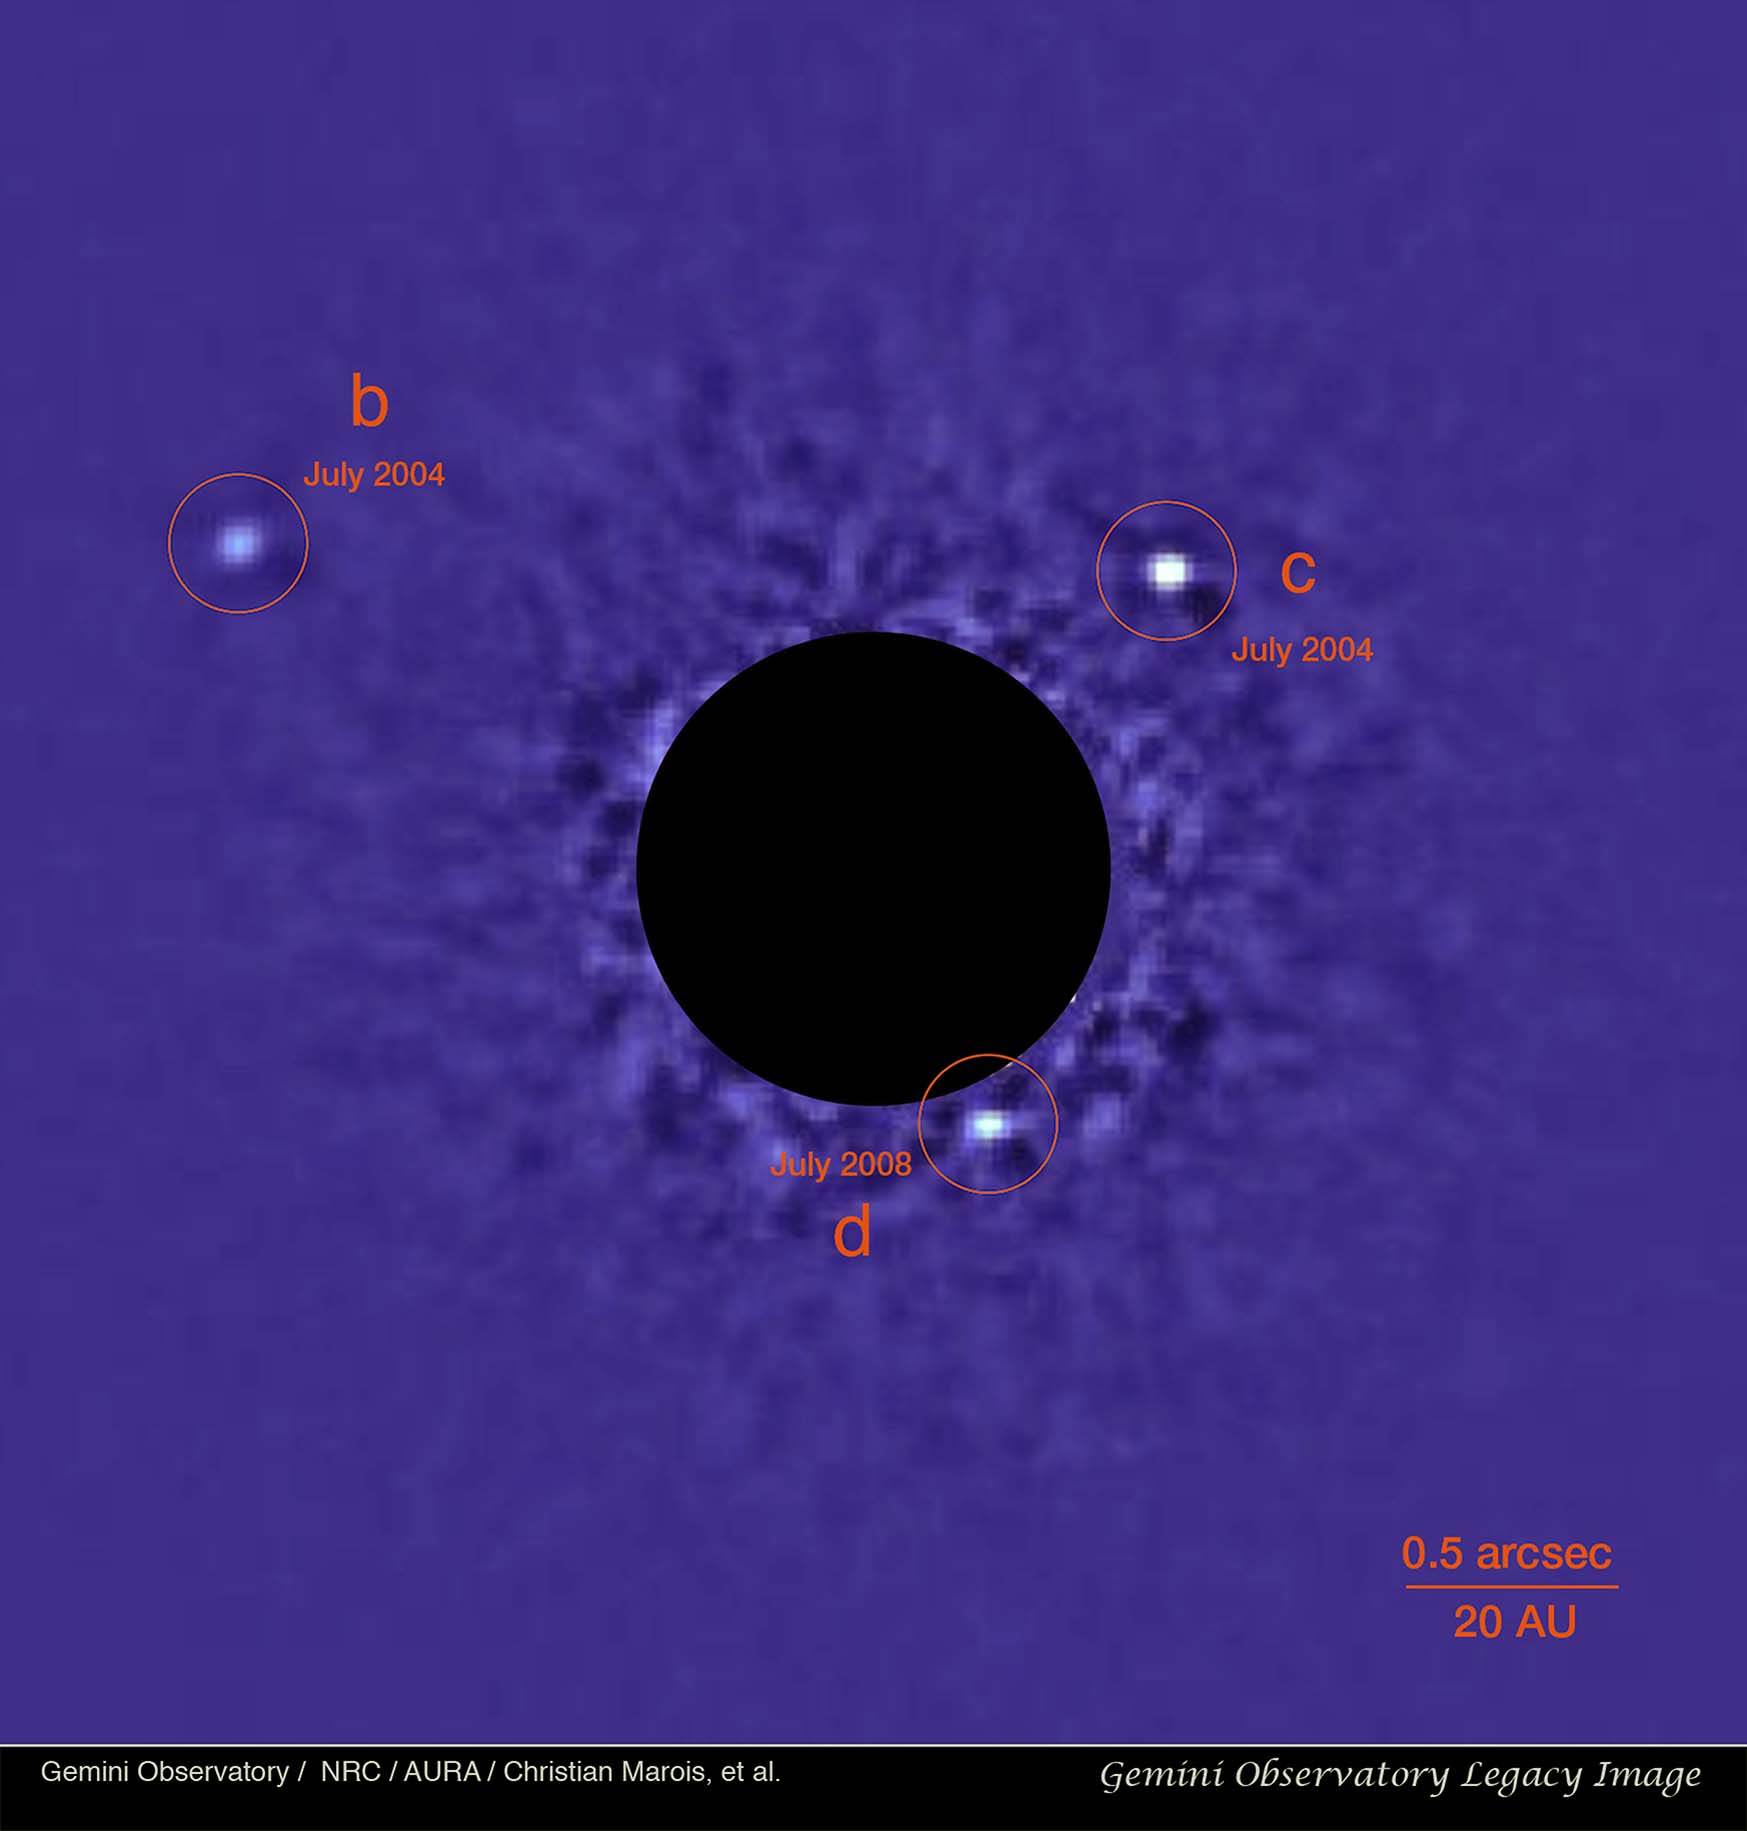 One of the first images of an extra-solar planetary system from Gemini Observatory.  A result like this requires great efforts by individual scientists and project management to make happen.